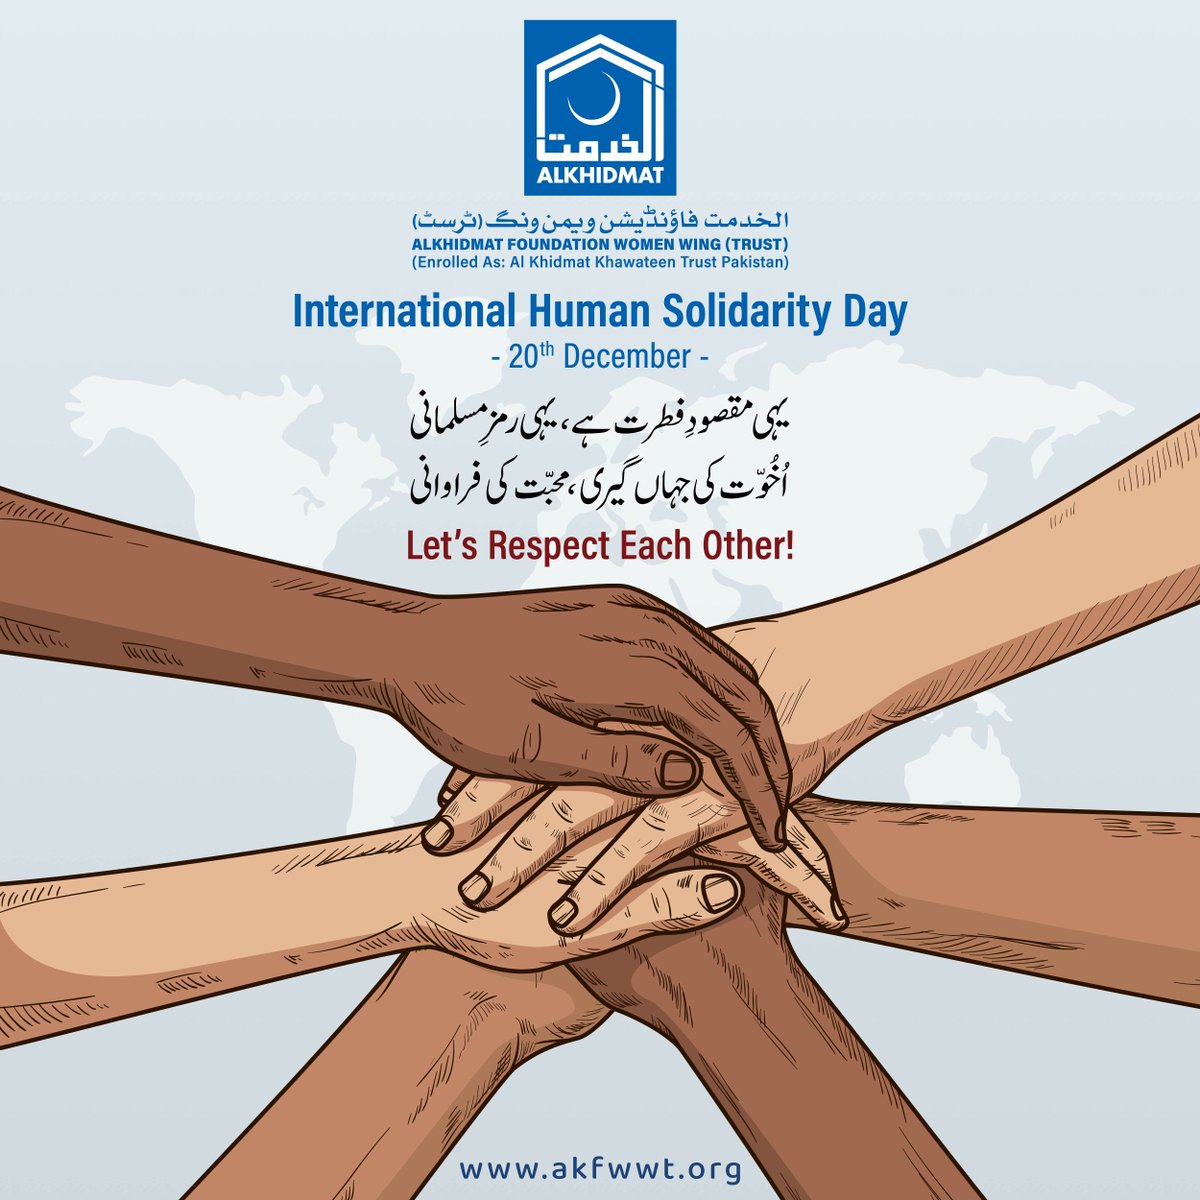 A day to celebrate our unity in diversity.

United in diversity, celebrating our common humanity on International Human Solidarity Day. Because together, we're stronger!
#InternationalHumanSolidarityDay2023 #Solidarity #HumanityUnited #Unity #Diversity #AlkhidmatKhawateen #akfwwt